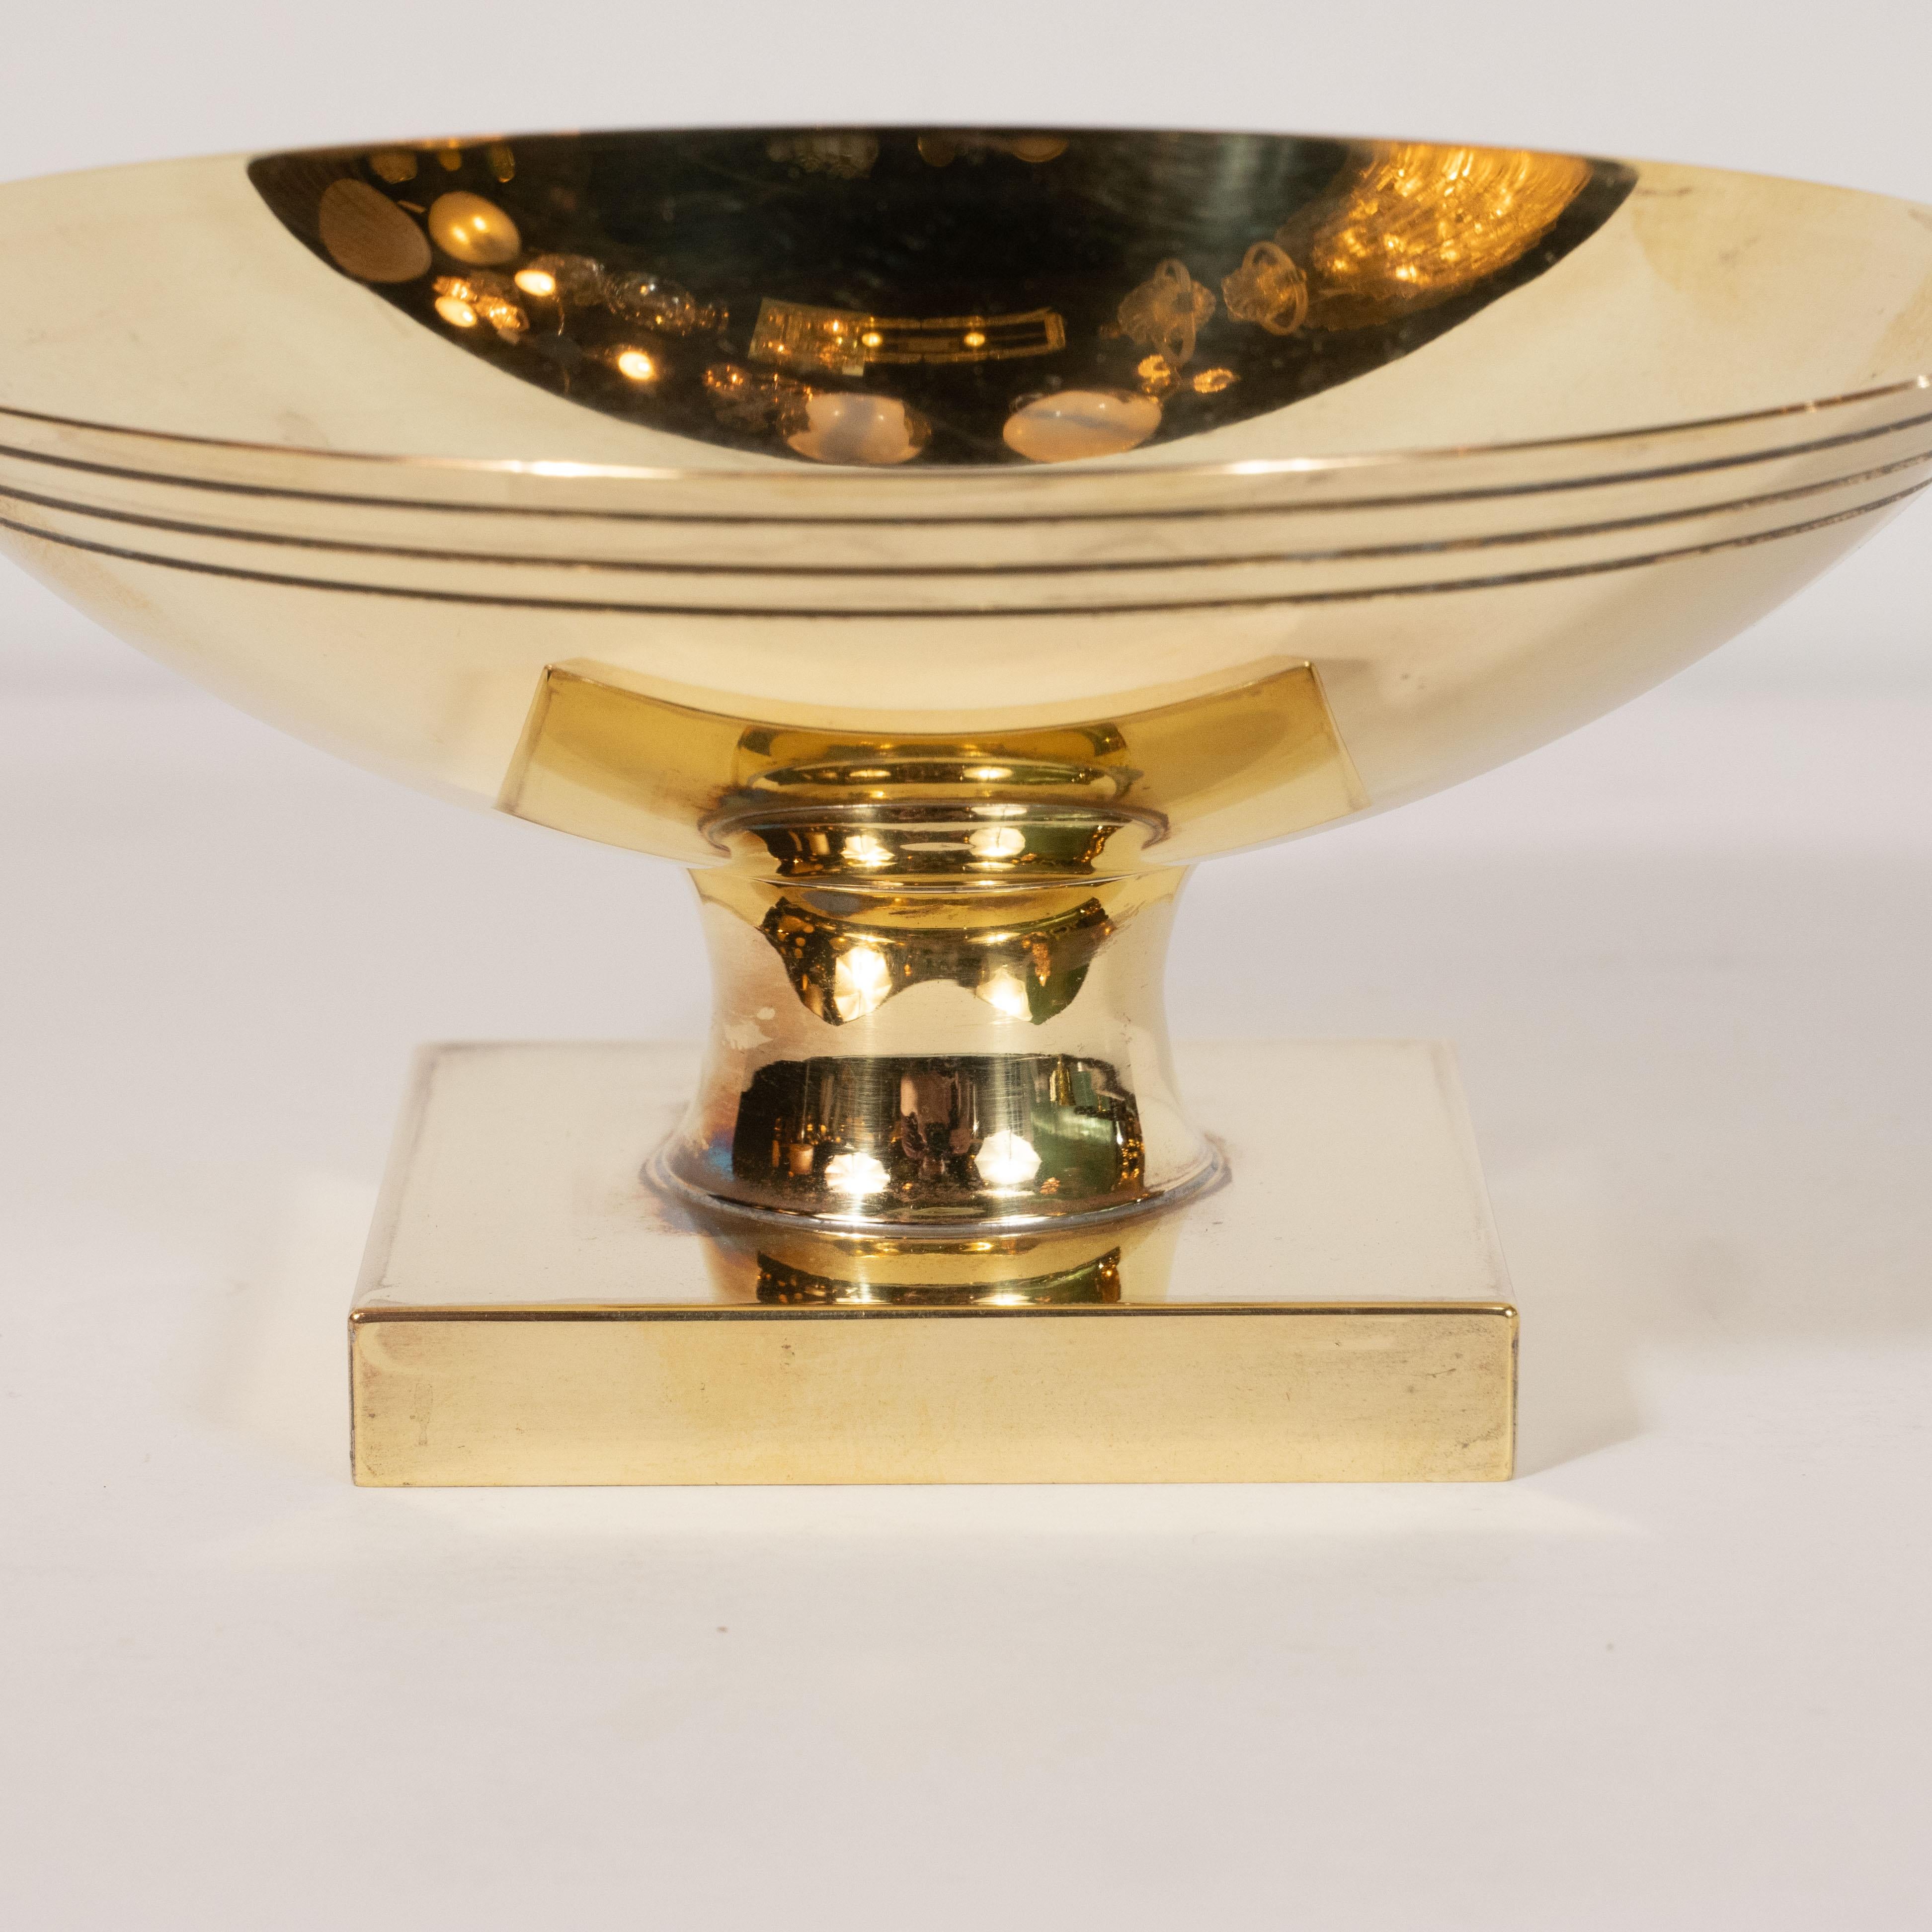 This stunning Mid-Century Modern dish was realized by the esteemed Tommi Parzinger for Dorlyn Silversmiths, circa 1950. It features a concave circular top with three bands circumscribing the perimeter. The piece sits on a volumetric square base that